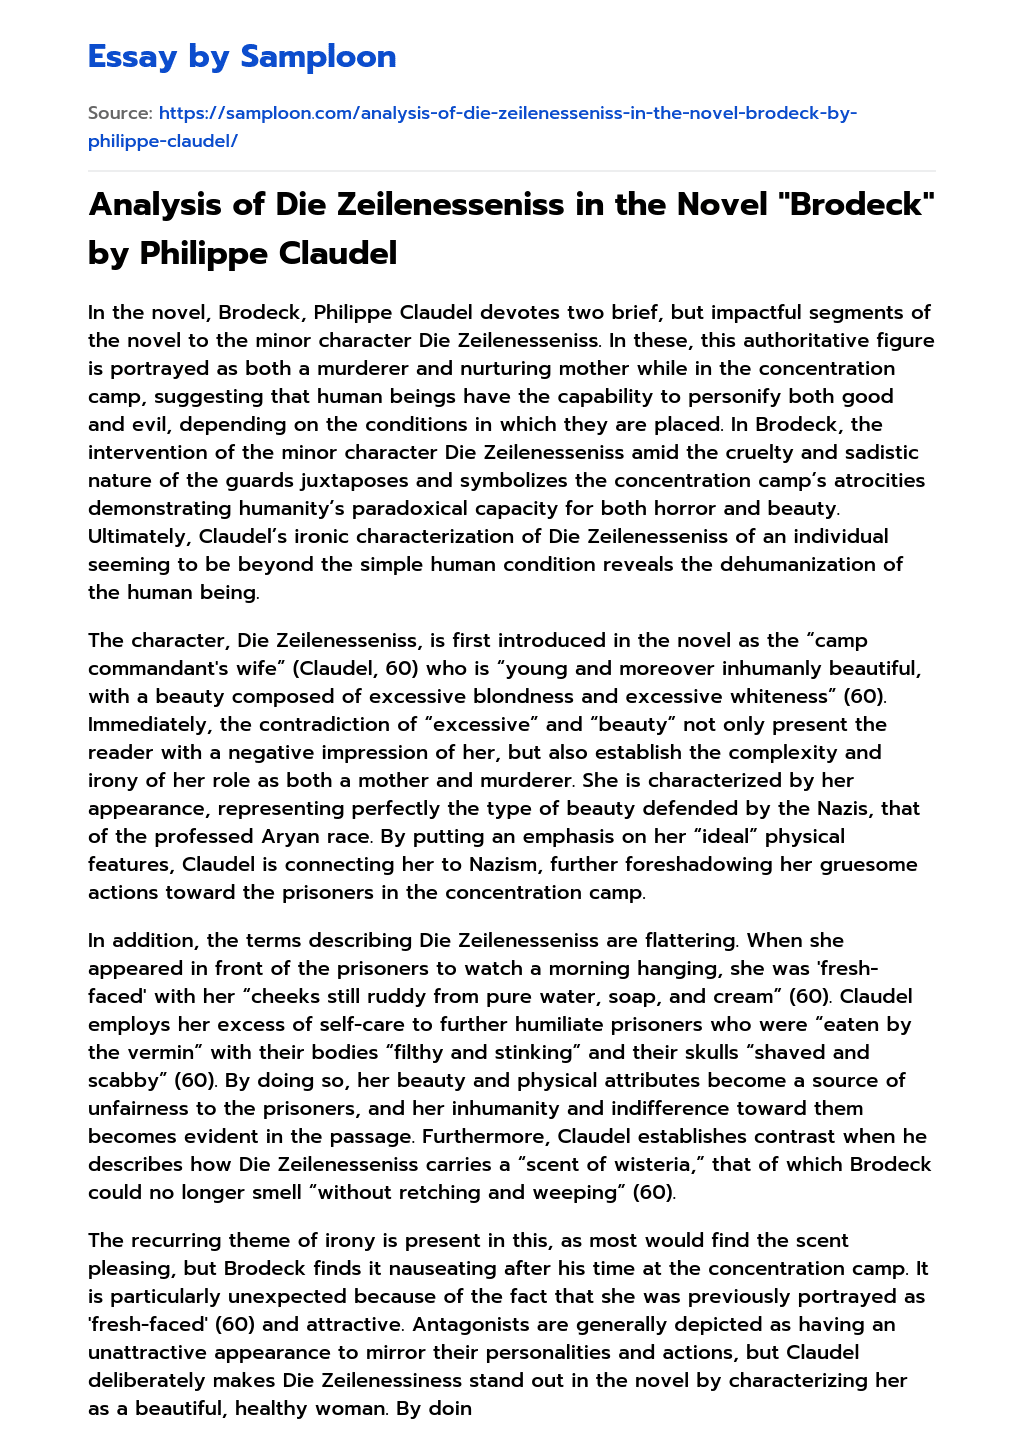 Analysis of Die Zeilenesseniss in the Novel “Brodeck” by Philippe Claudel essay